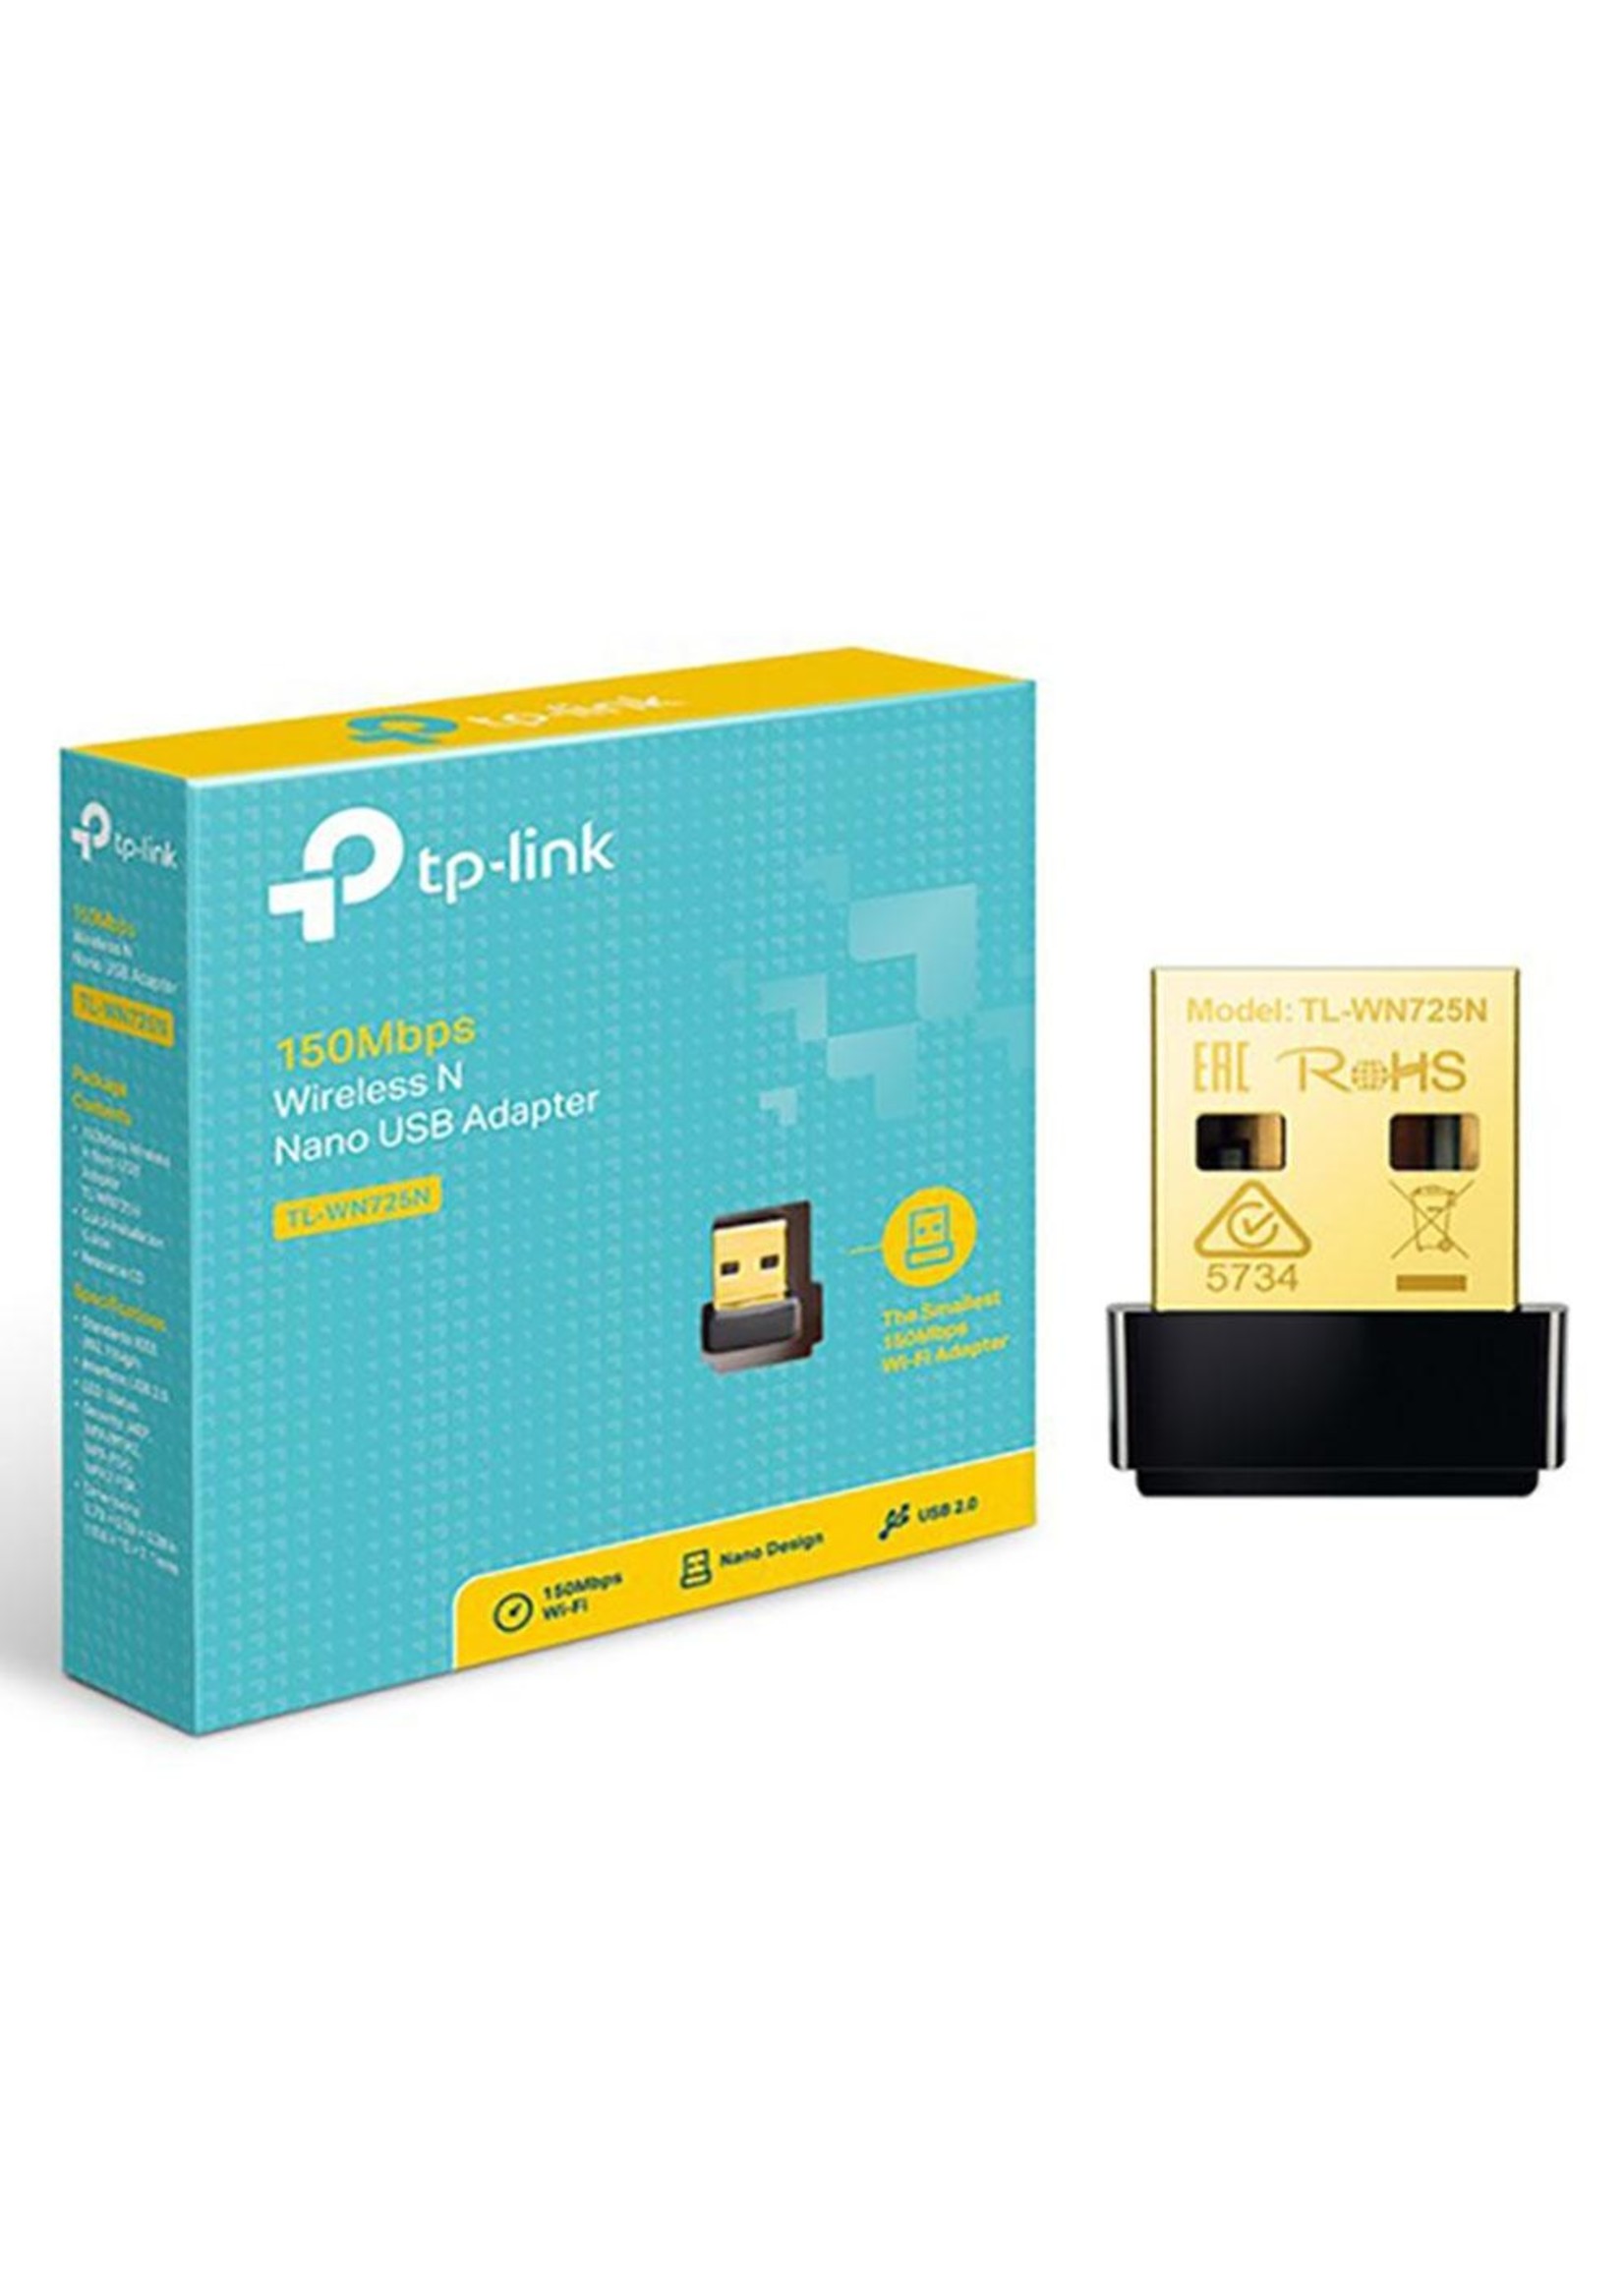 TP-LINK 150Mbps Wireless N Nano USB Adapter (CLEARANCE)